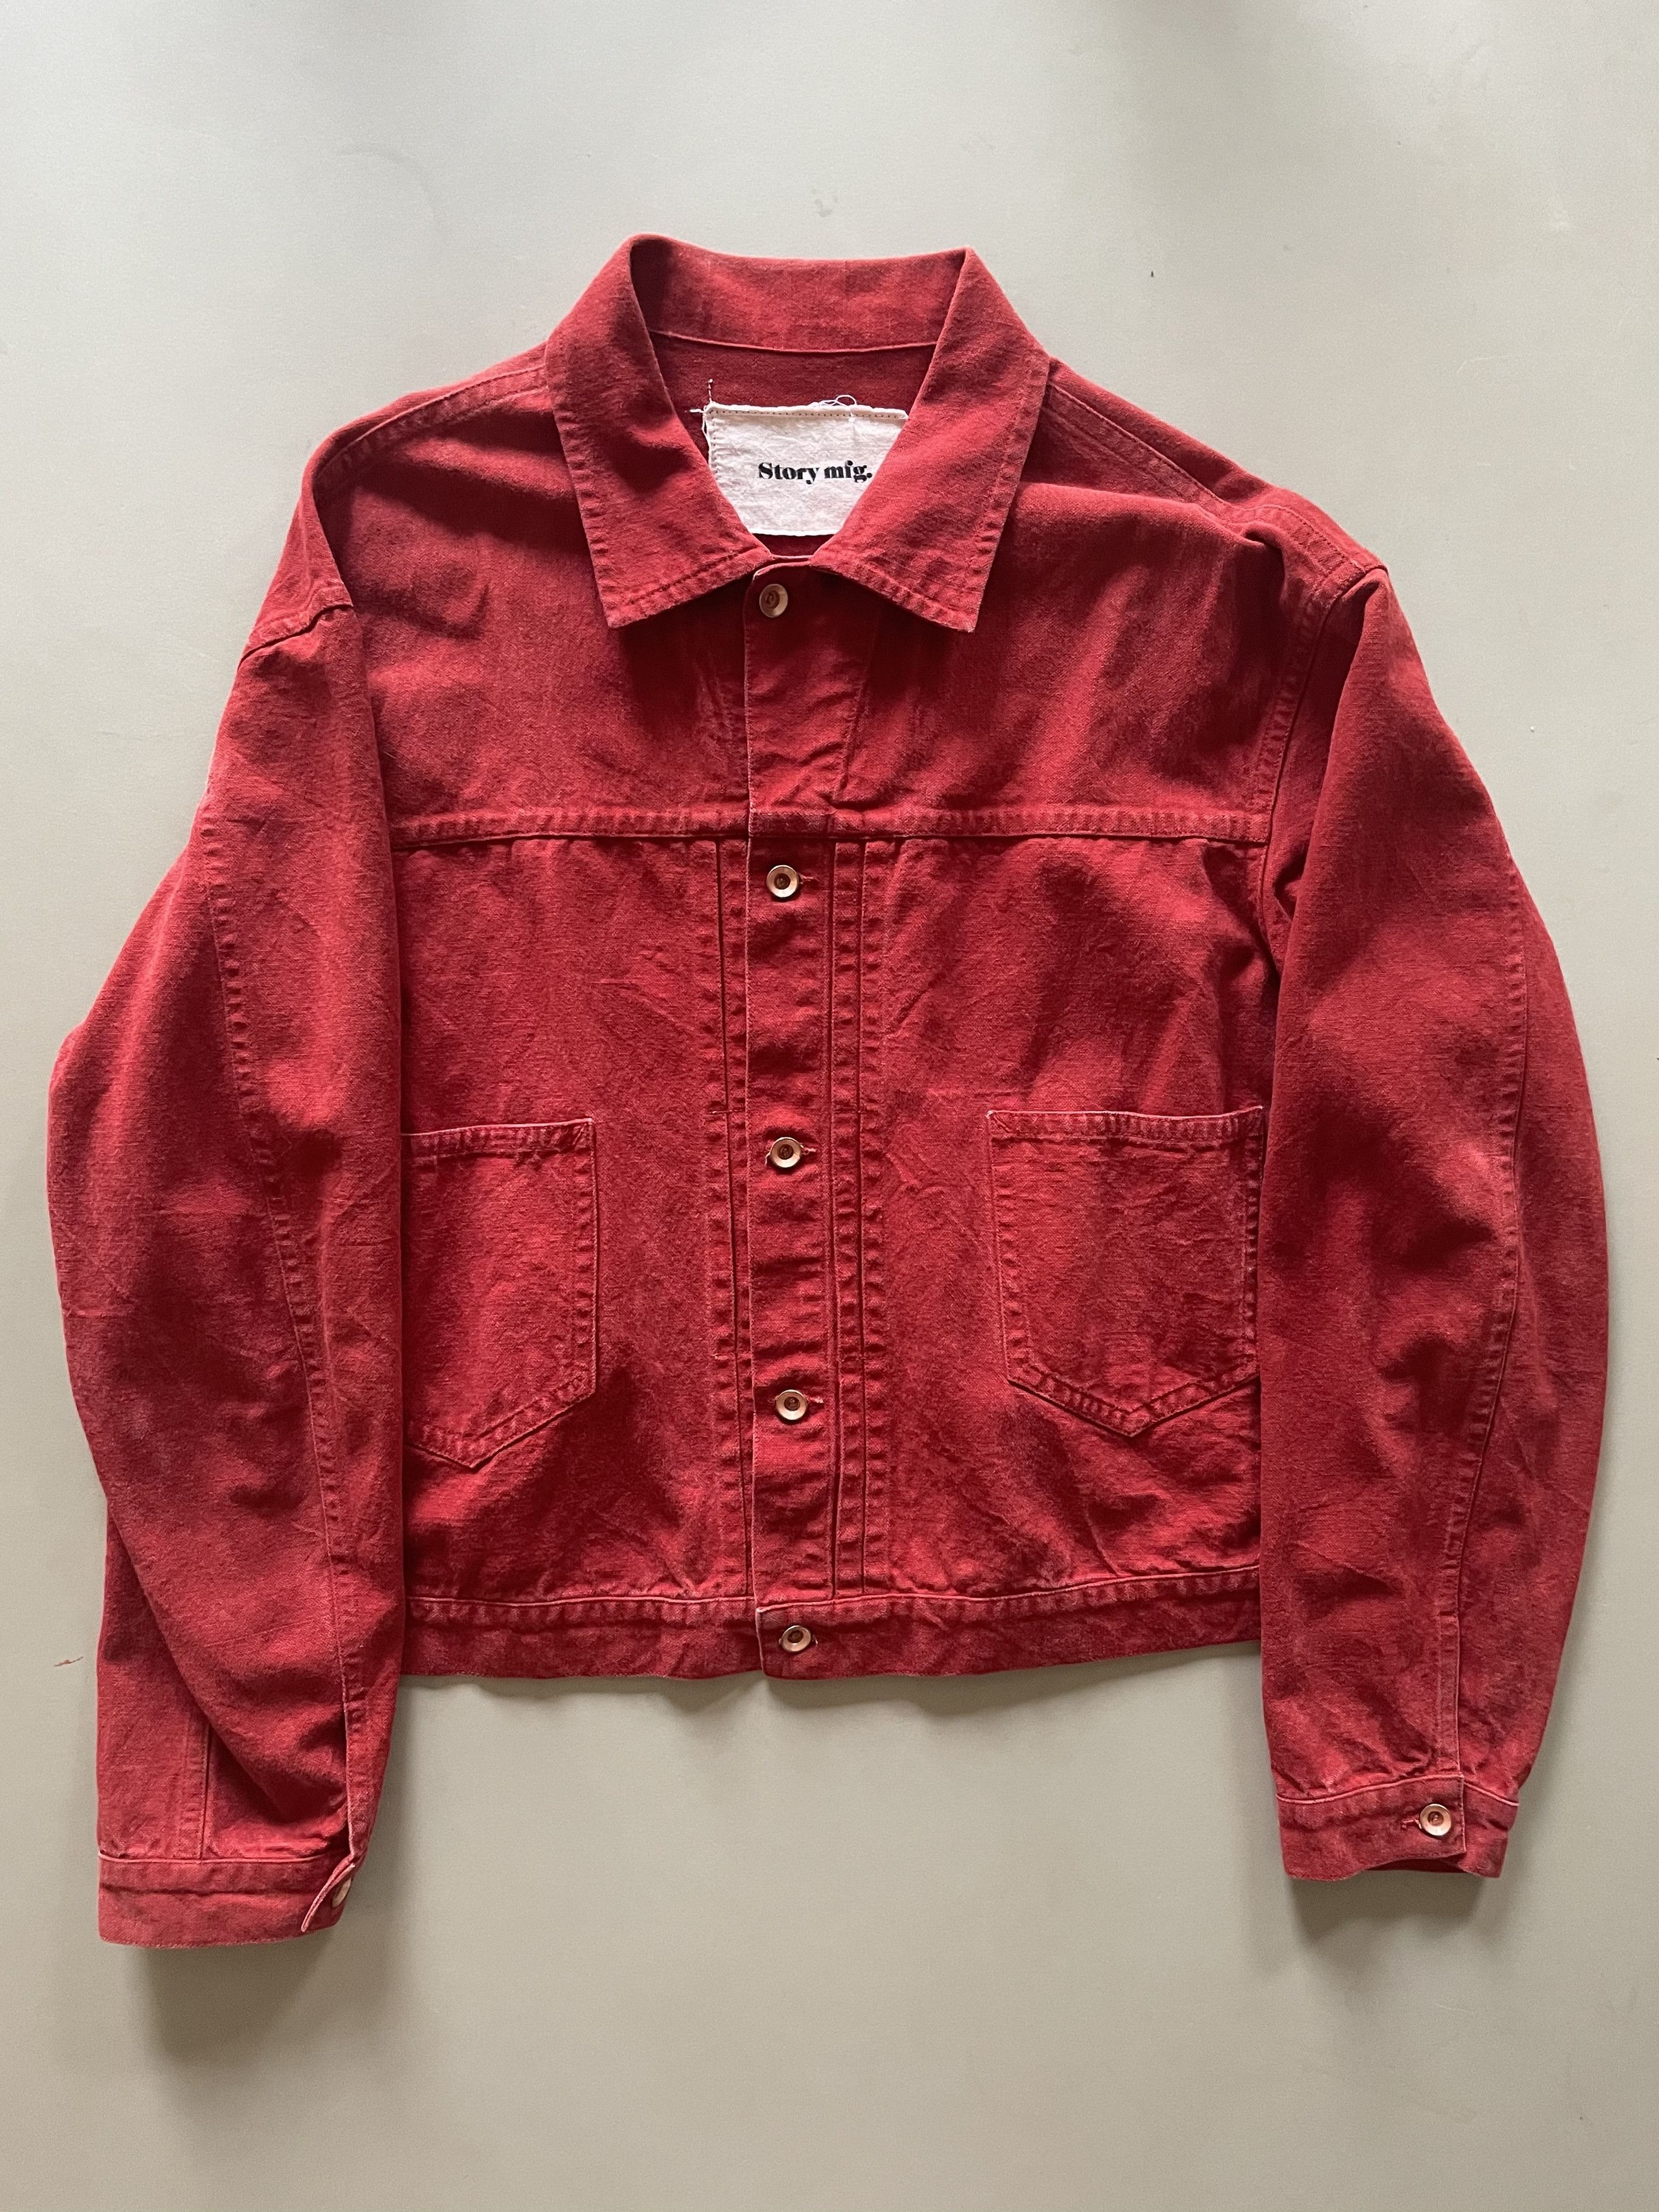 Story Mfg. RARE - Sundae Jacket in Red Madder Dyed Organic Canvas | Grailed